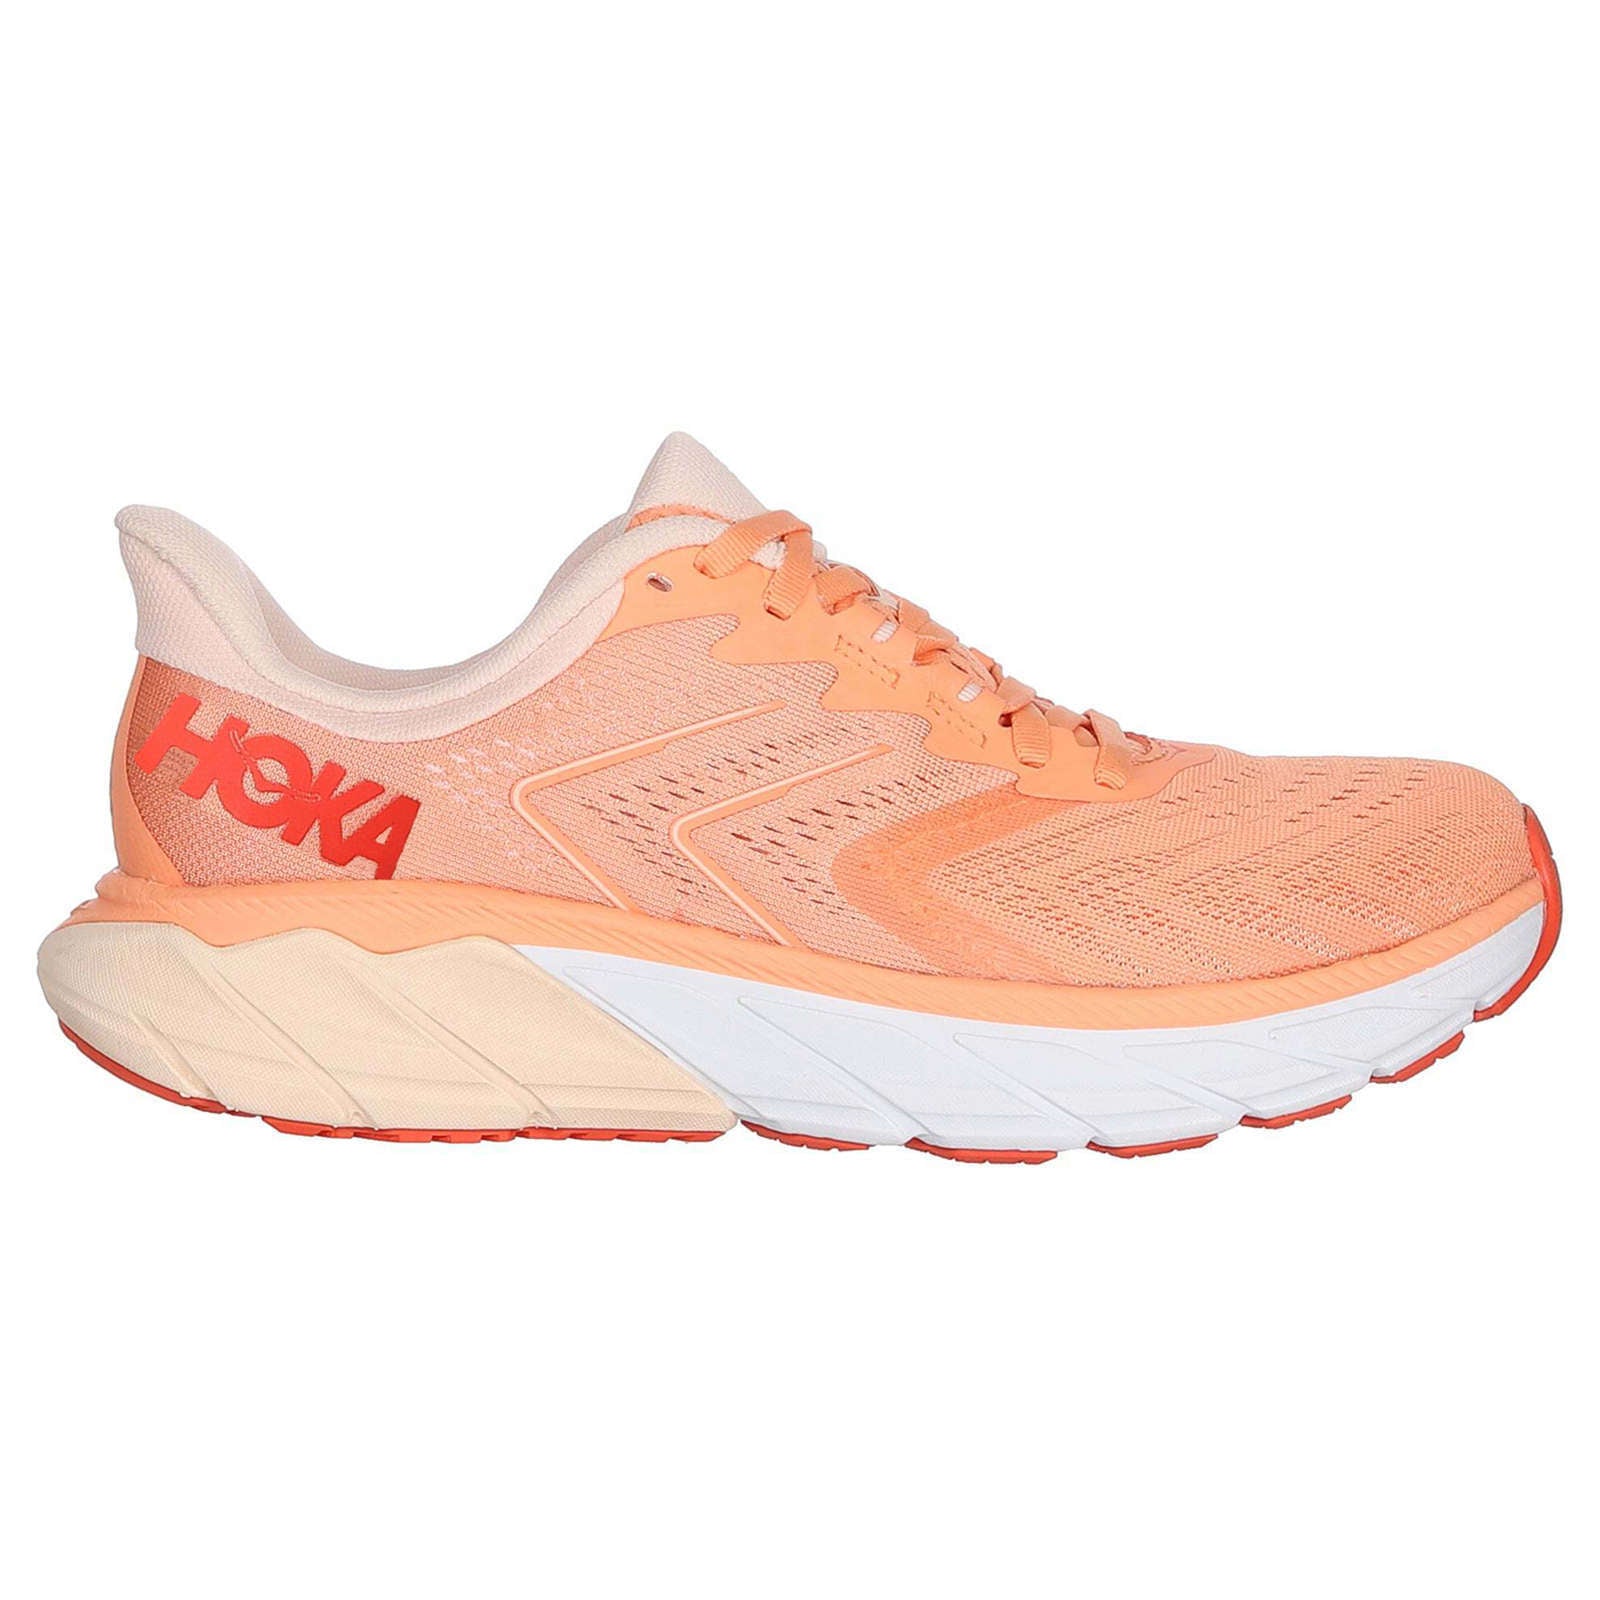 Hoka One One Arahi 5 Synthetic Textile Women's Low-Top Road Running Sneakers#color_cantaloupe silver peony